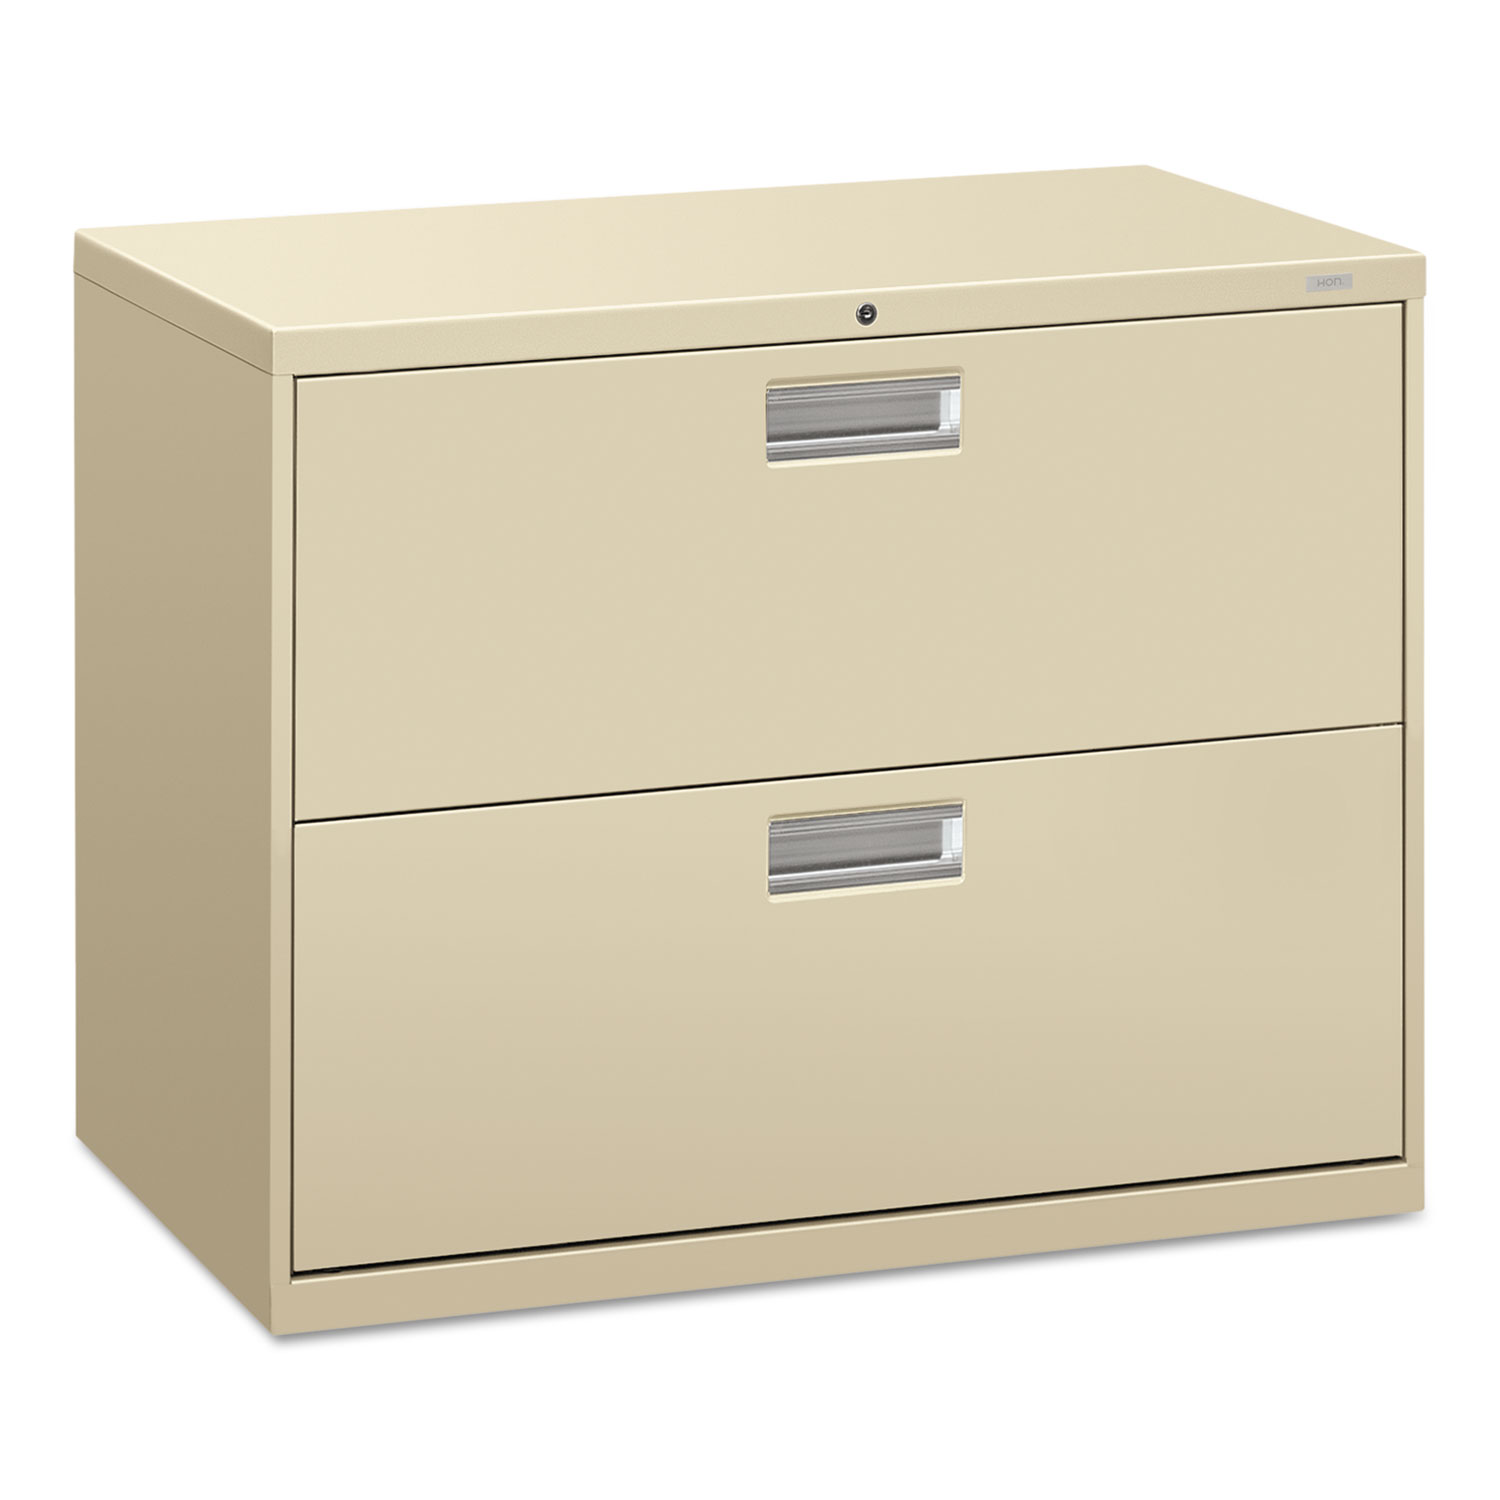 HON 600 Series Two-Drawer Lateral File, 36w x 19-1/4d, Putty